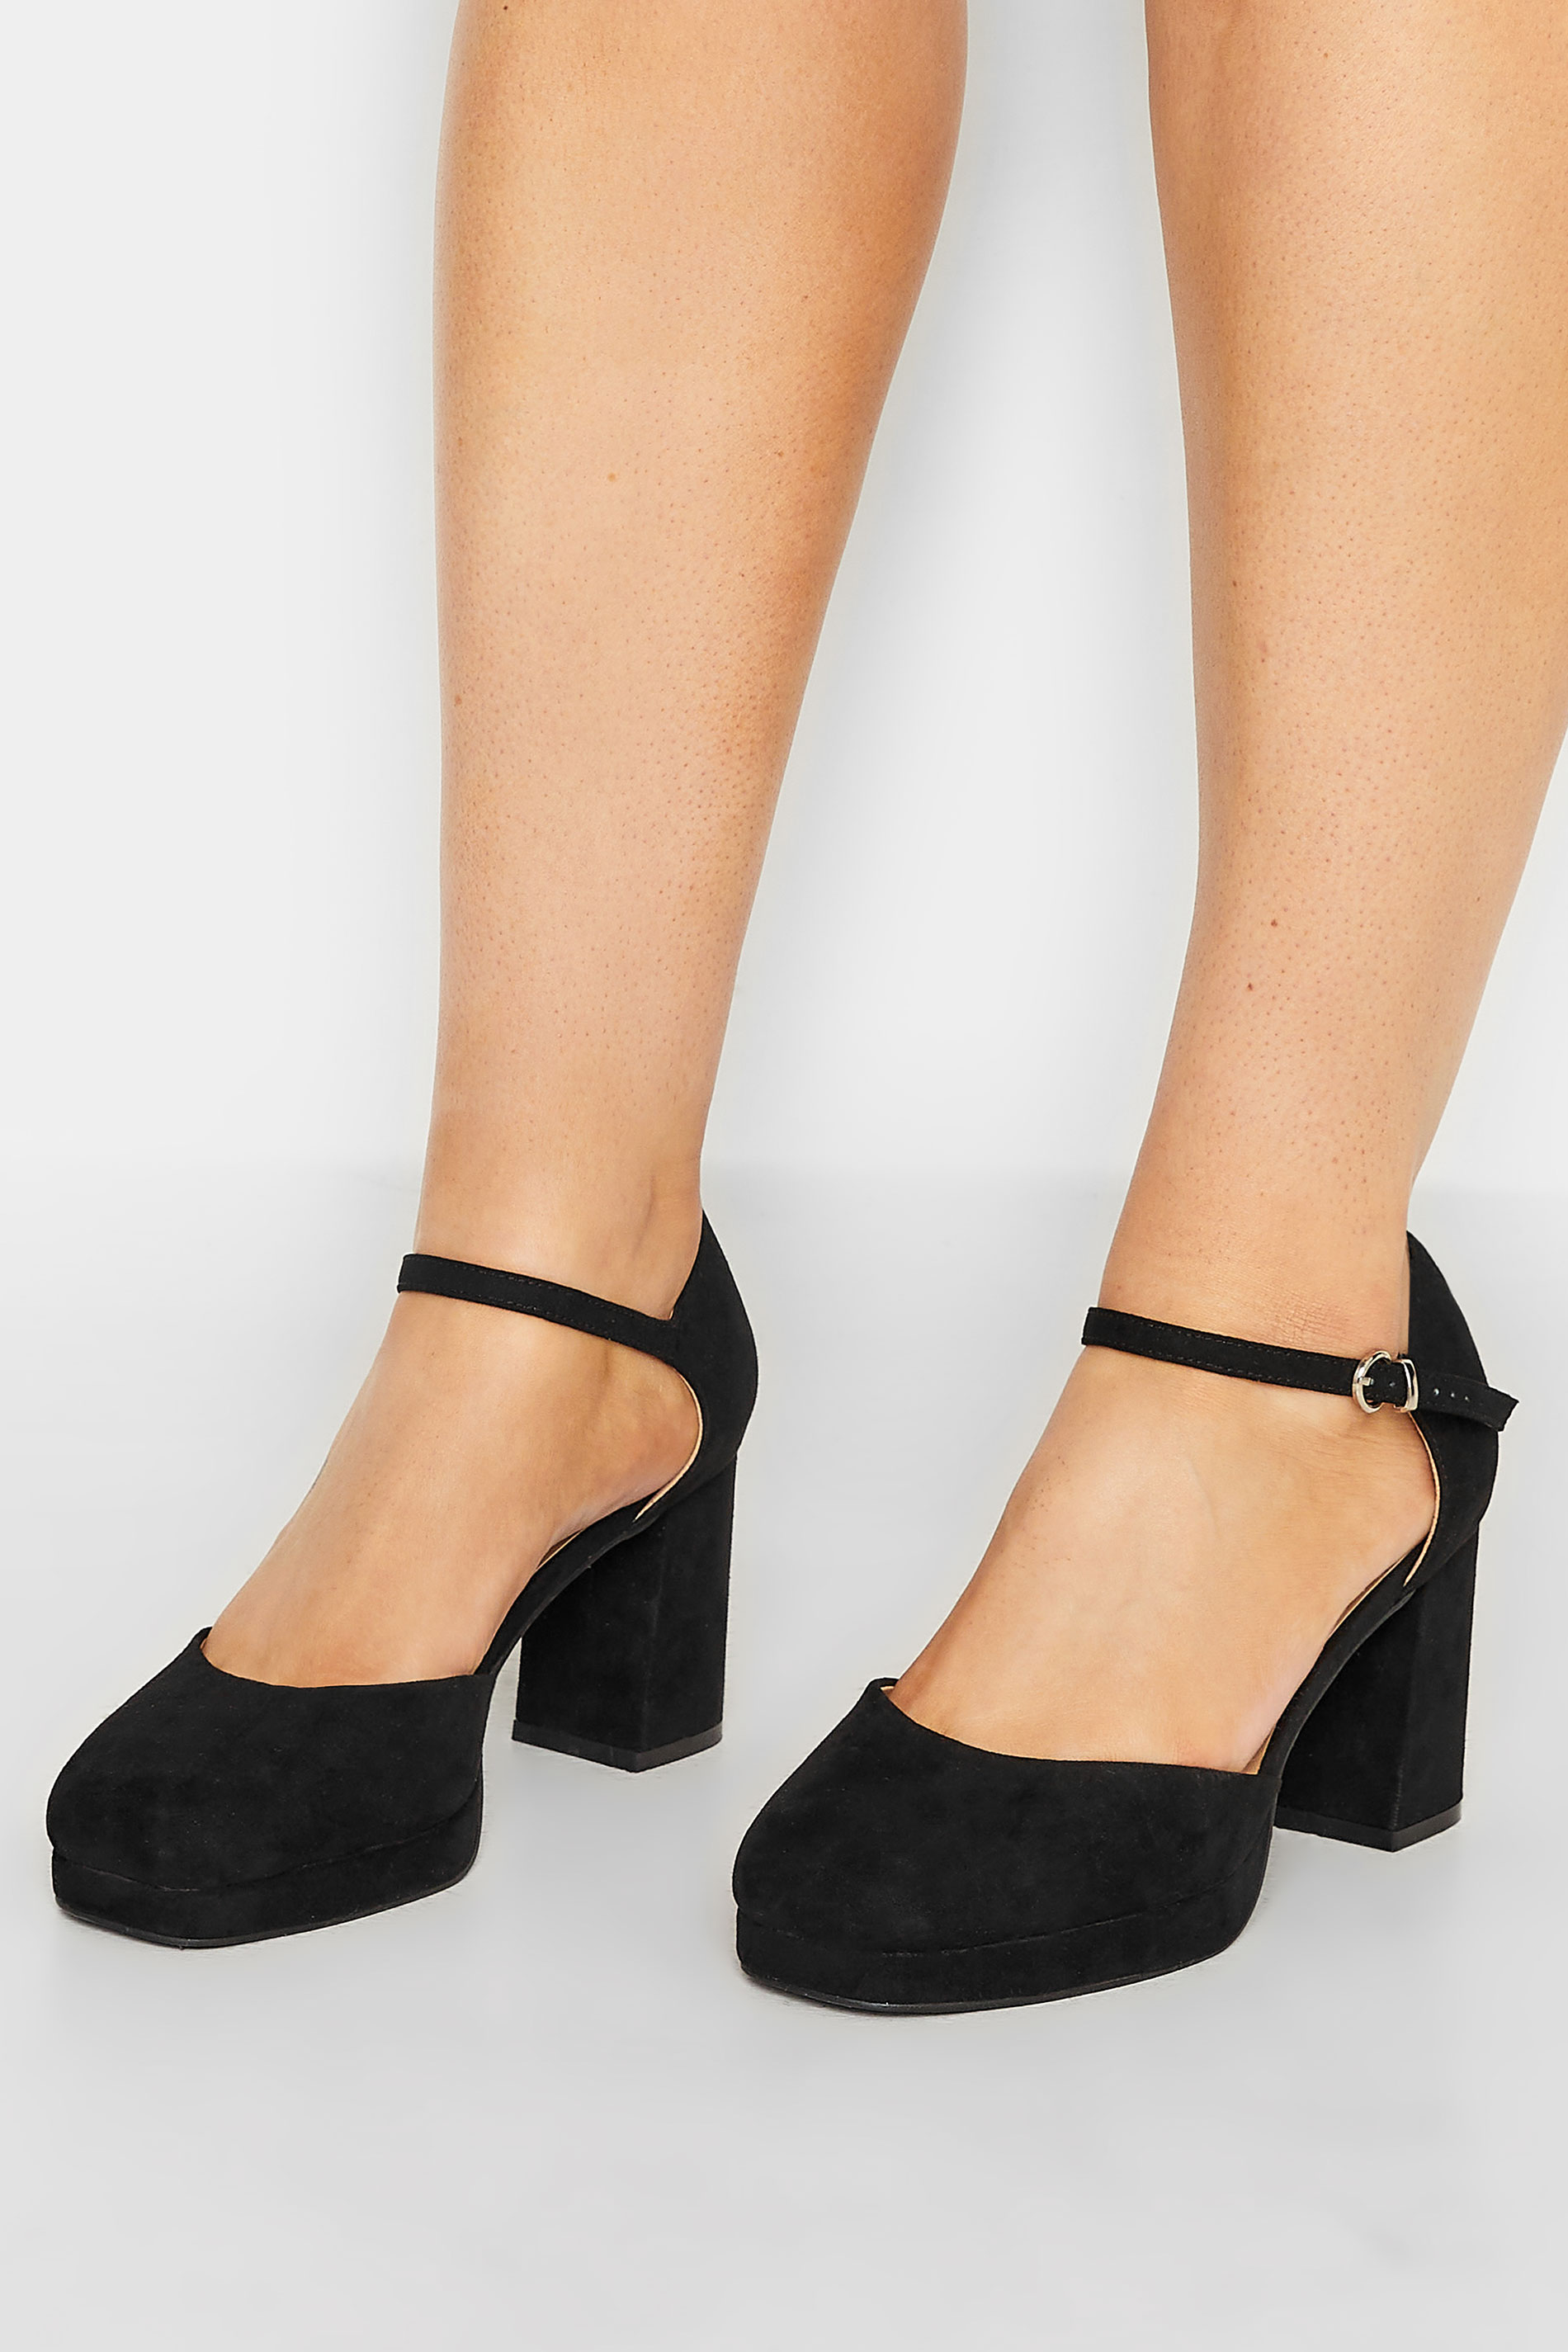 LIMITED COLLECTION Black Platform Court Shoes In Extra Wide EEE Fit | Yours Clothing 1